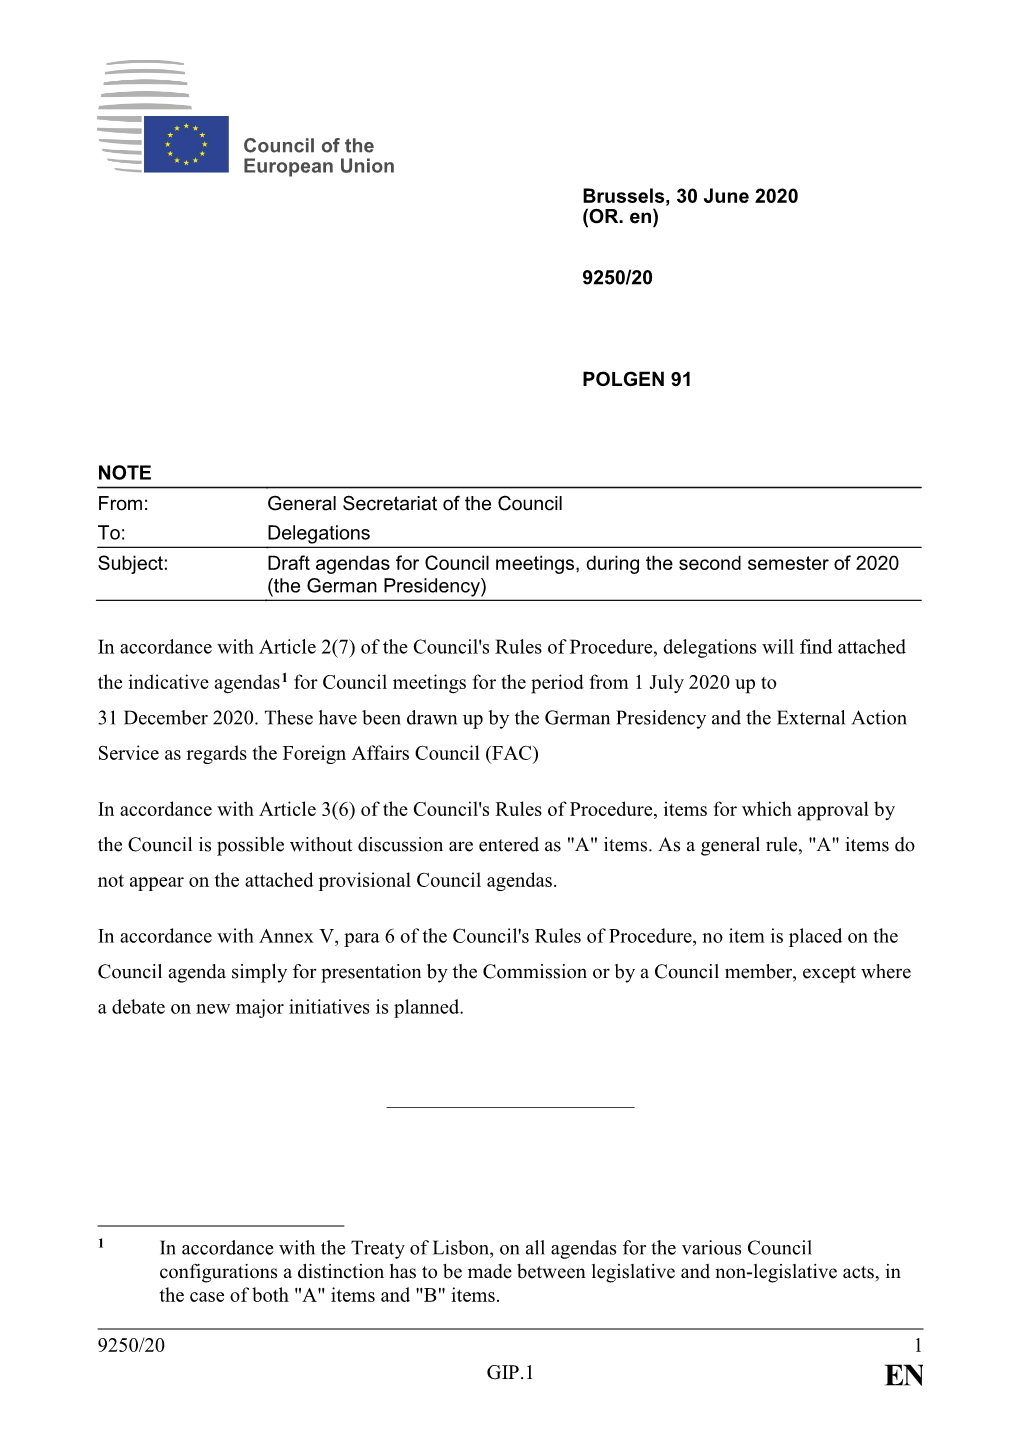 9250/20 1 GIP.1 in Accordance with Article 2(7) of the Council's Rules Of